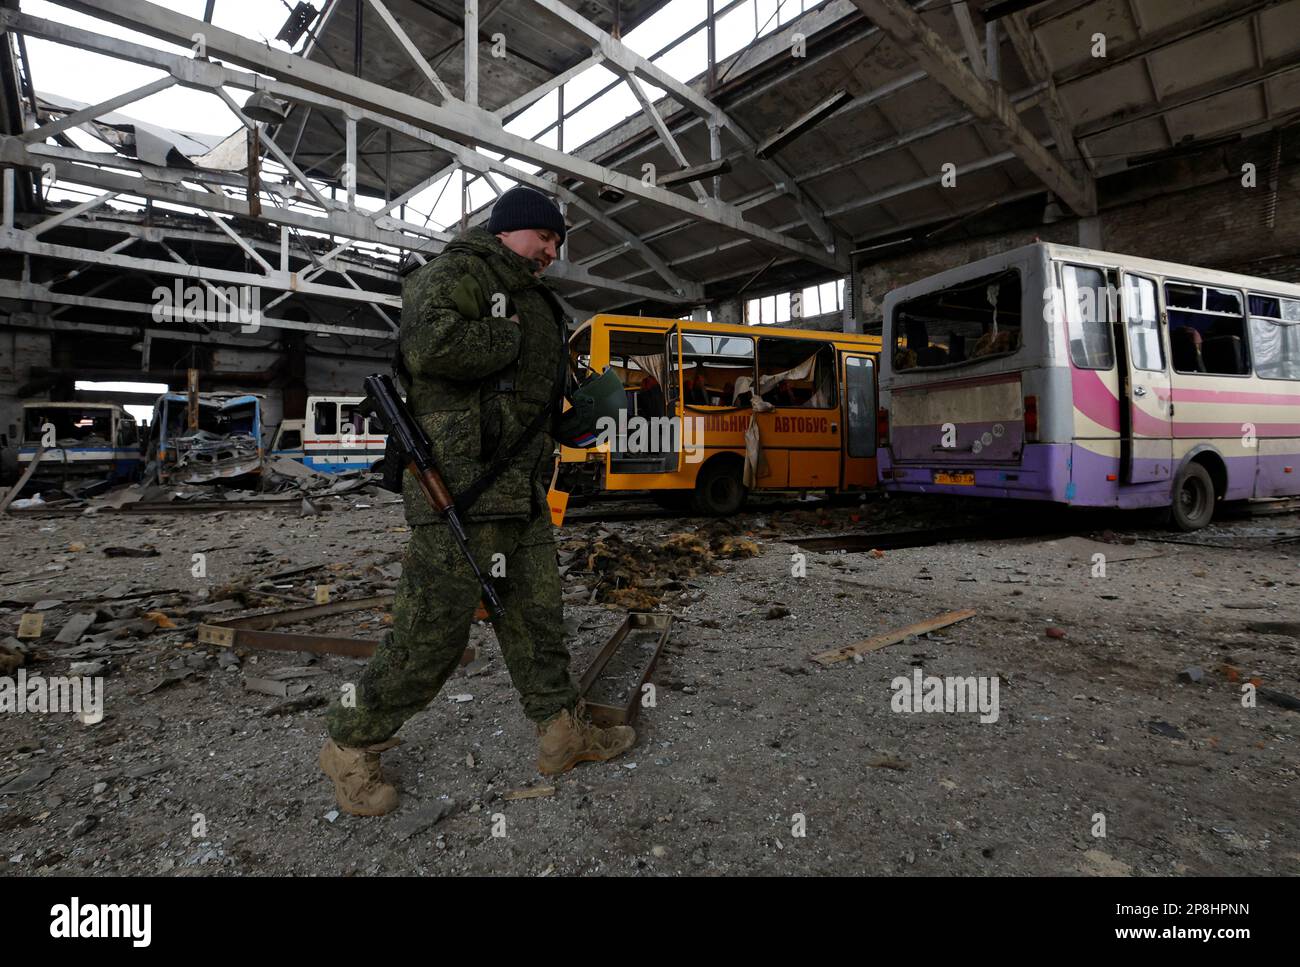 A Russian service member walks through a bus depot damaged by recent shelling in the course of Russia-Ukraine conflict, in the town of Volnovakha in the Donetsk region, Russian-controlled Ukraine, March 9, 2023. REUTERS/Alexander Ermochenko Stock Photo